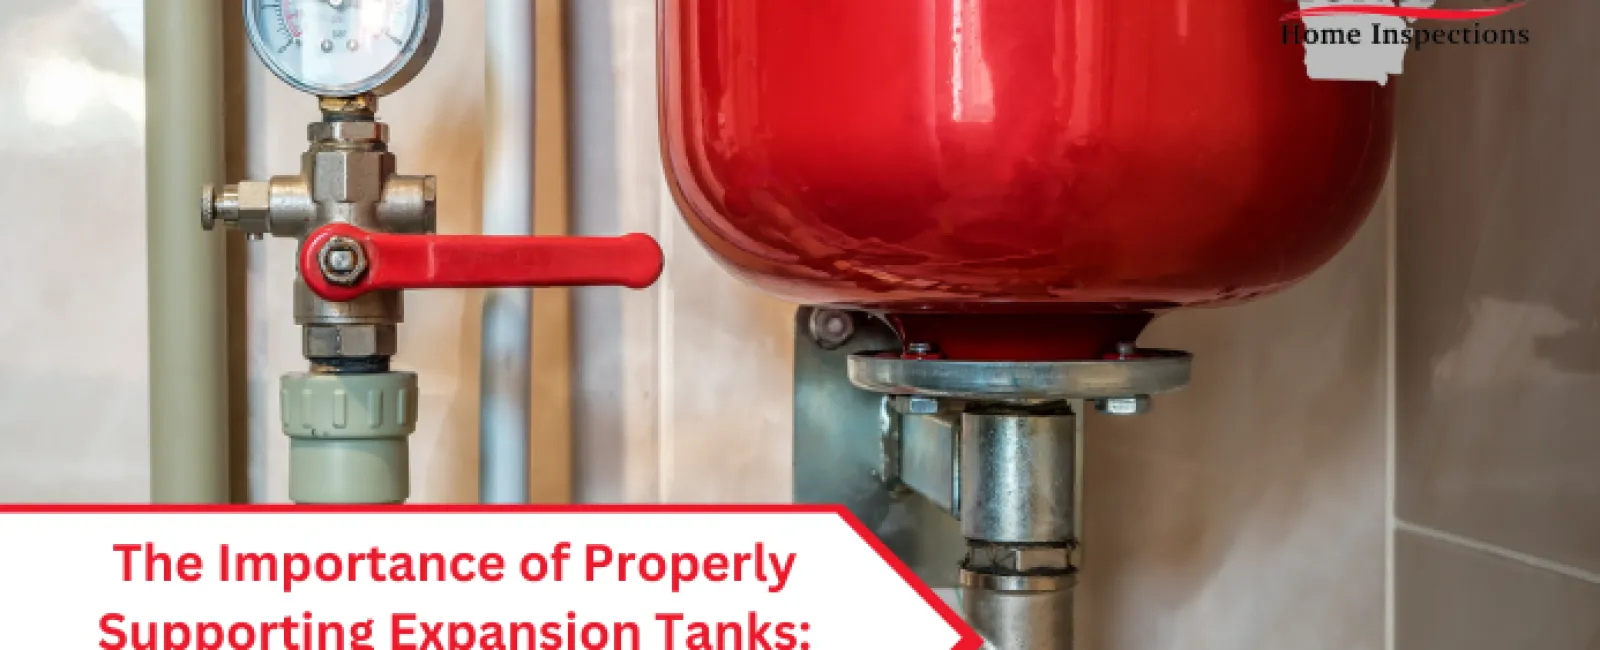 The Importance of Properly Supporting Expansion Tanks: A Home Inspection Perspective